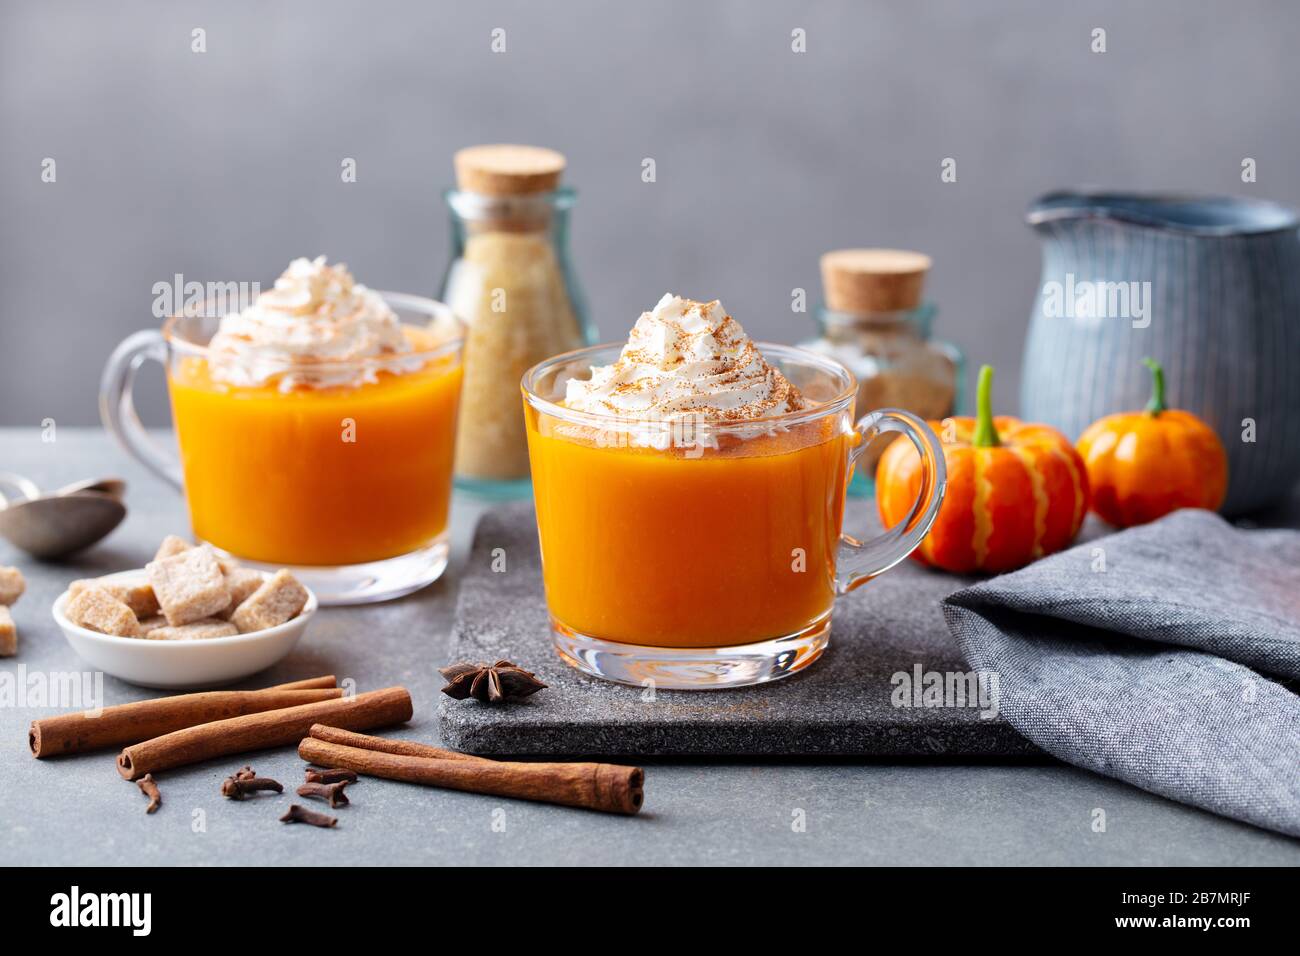 Pumpkin latte with whipped cream in glass cups. Grey background. Close up. Stock Photo